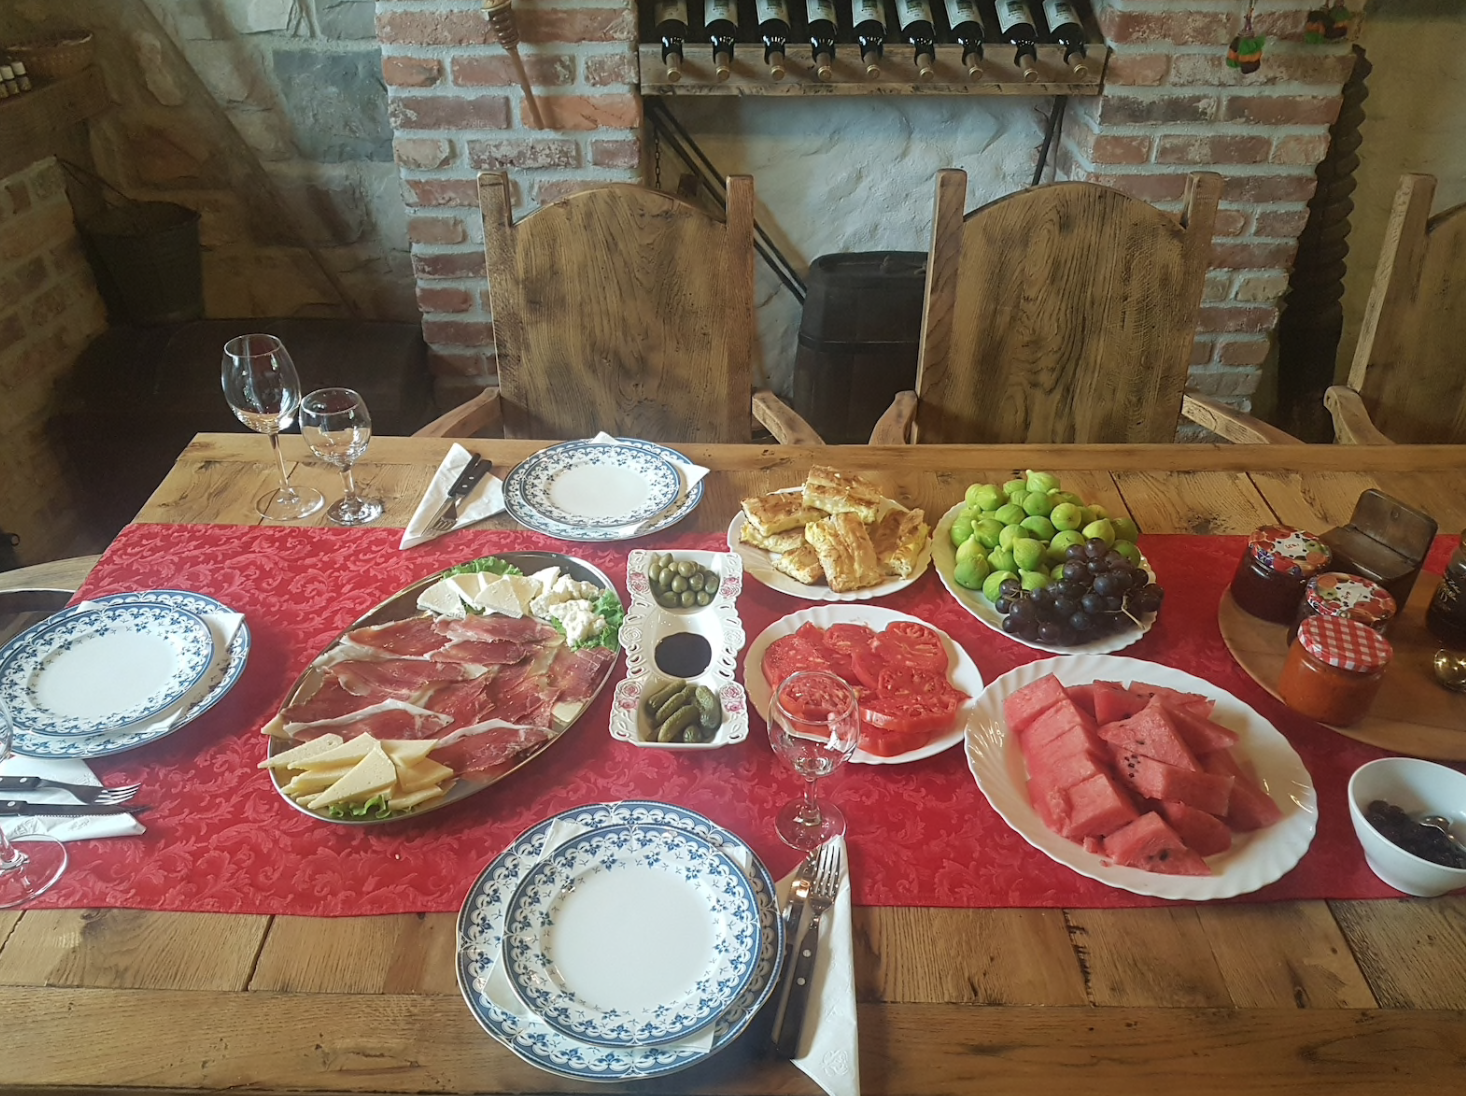 Dine with a local family in a village outside of Split, Croatia - an Airbnb experience